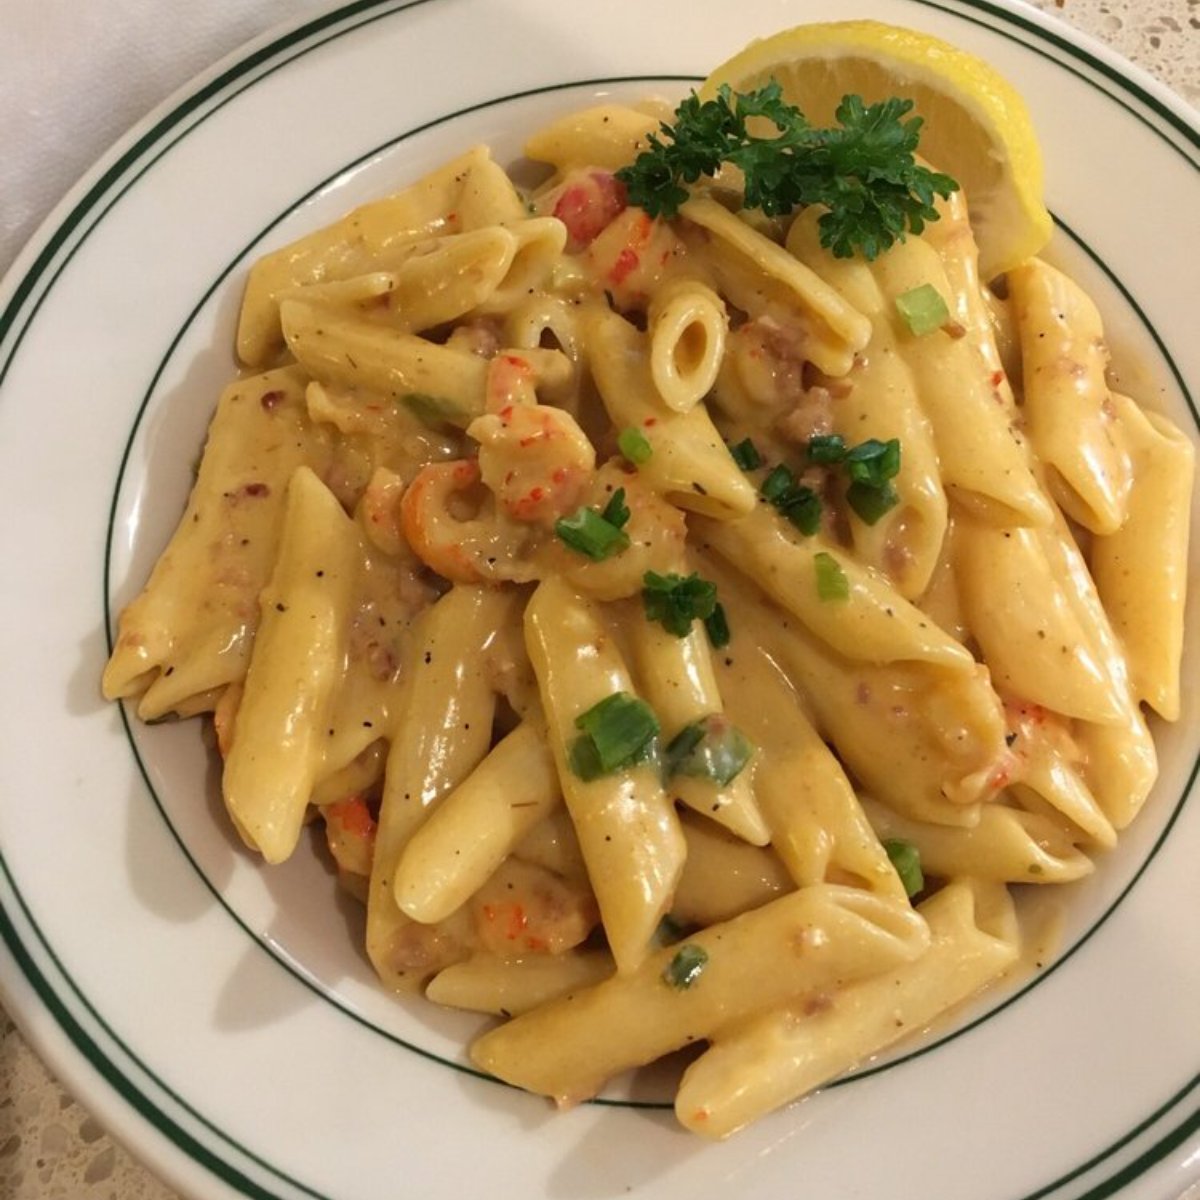 A plate of penne pasta and crawfish tails